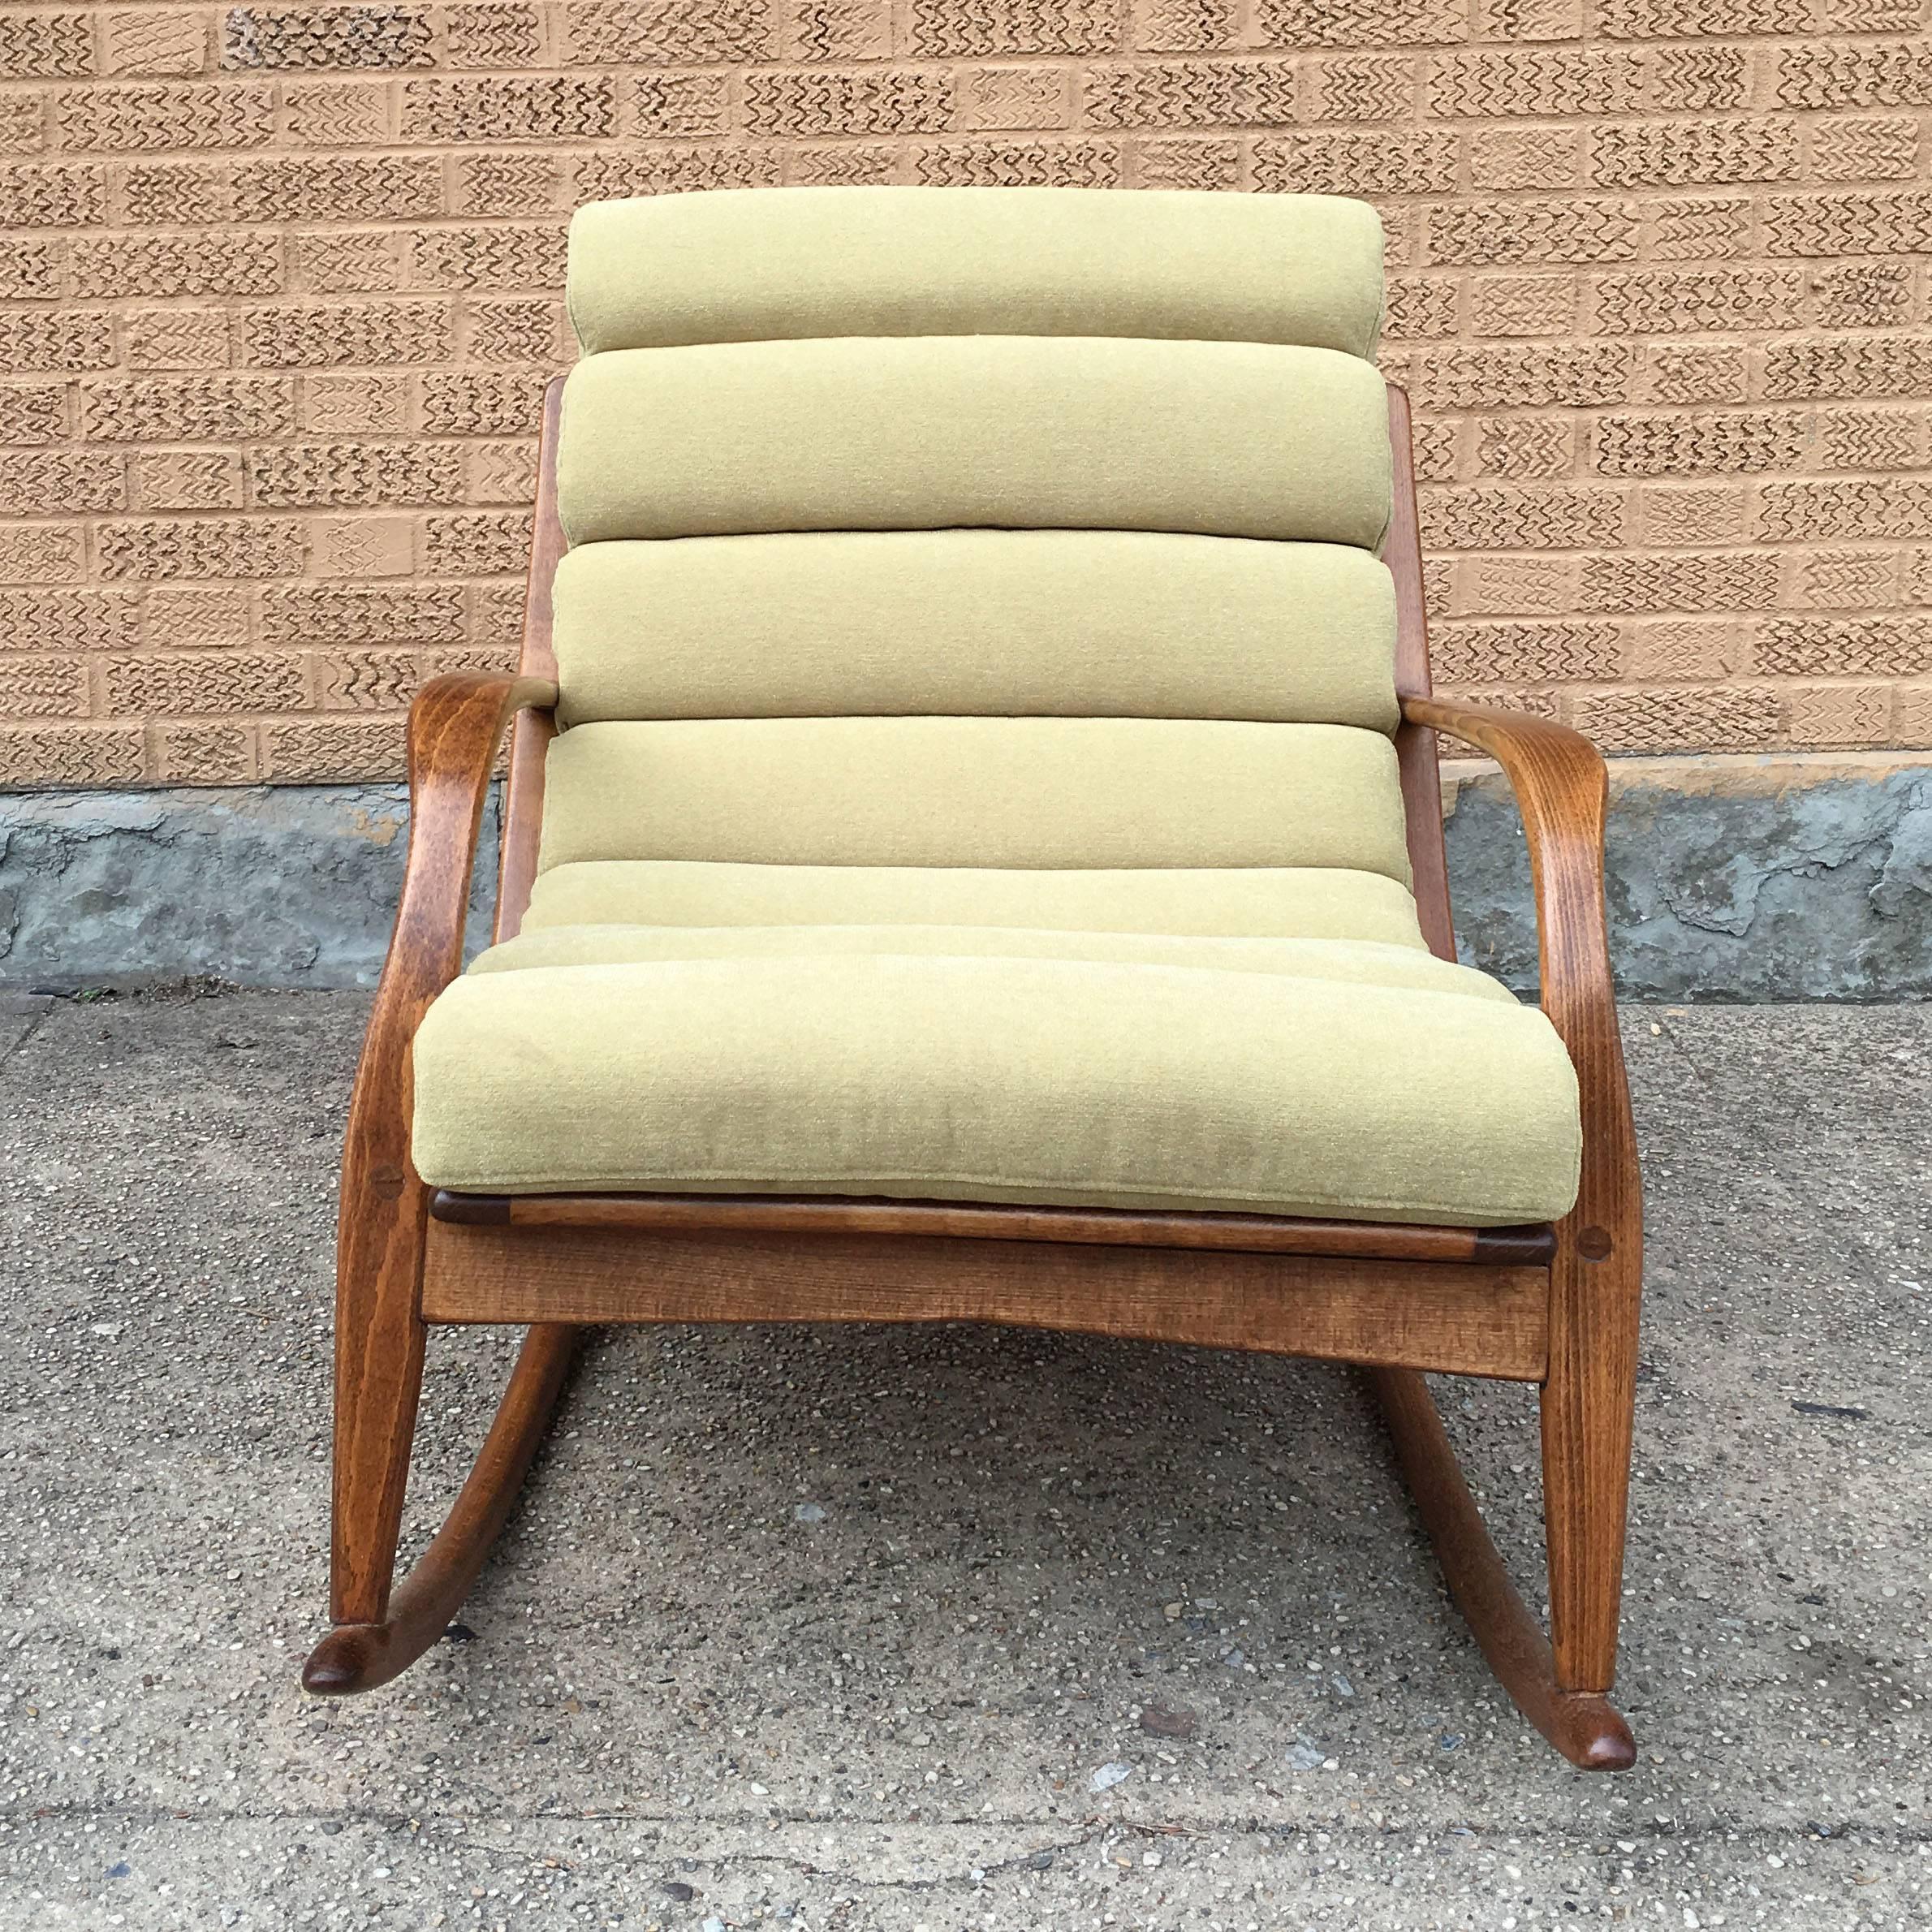 Mid-20th Century Extremely Rare Danish Modern Bentwood Upholstered Rocking Chair